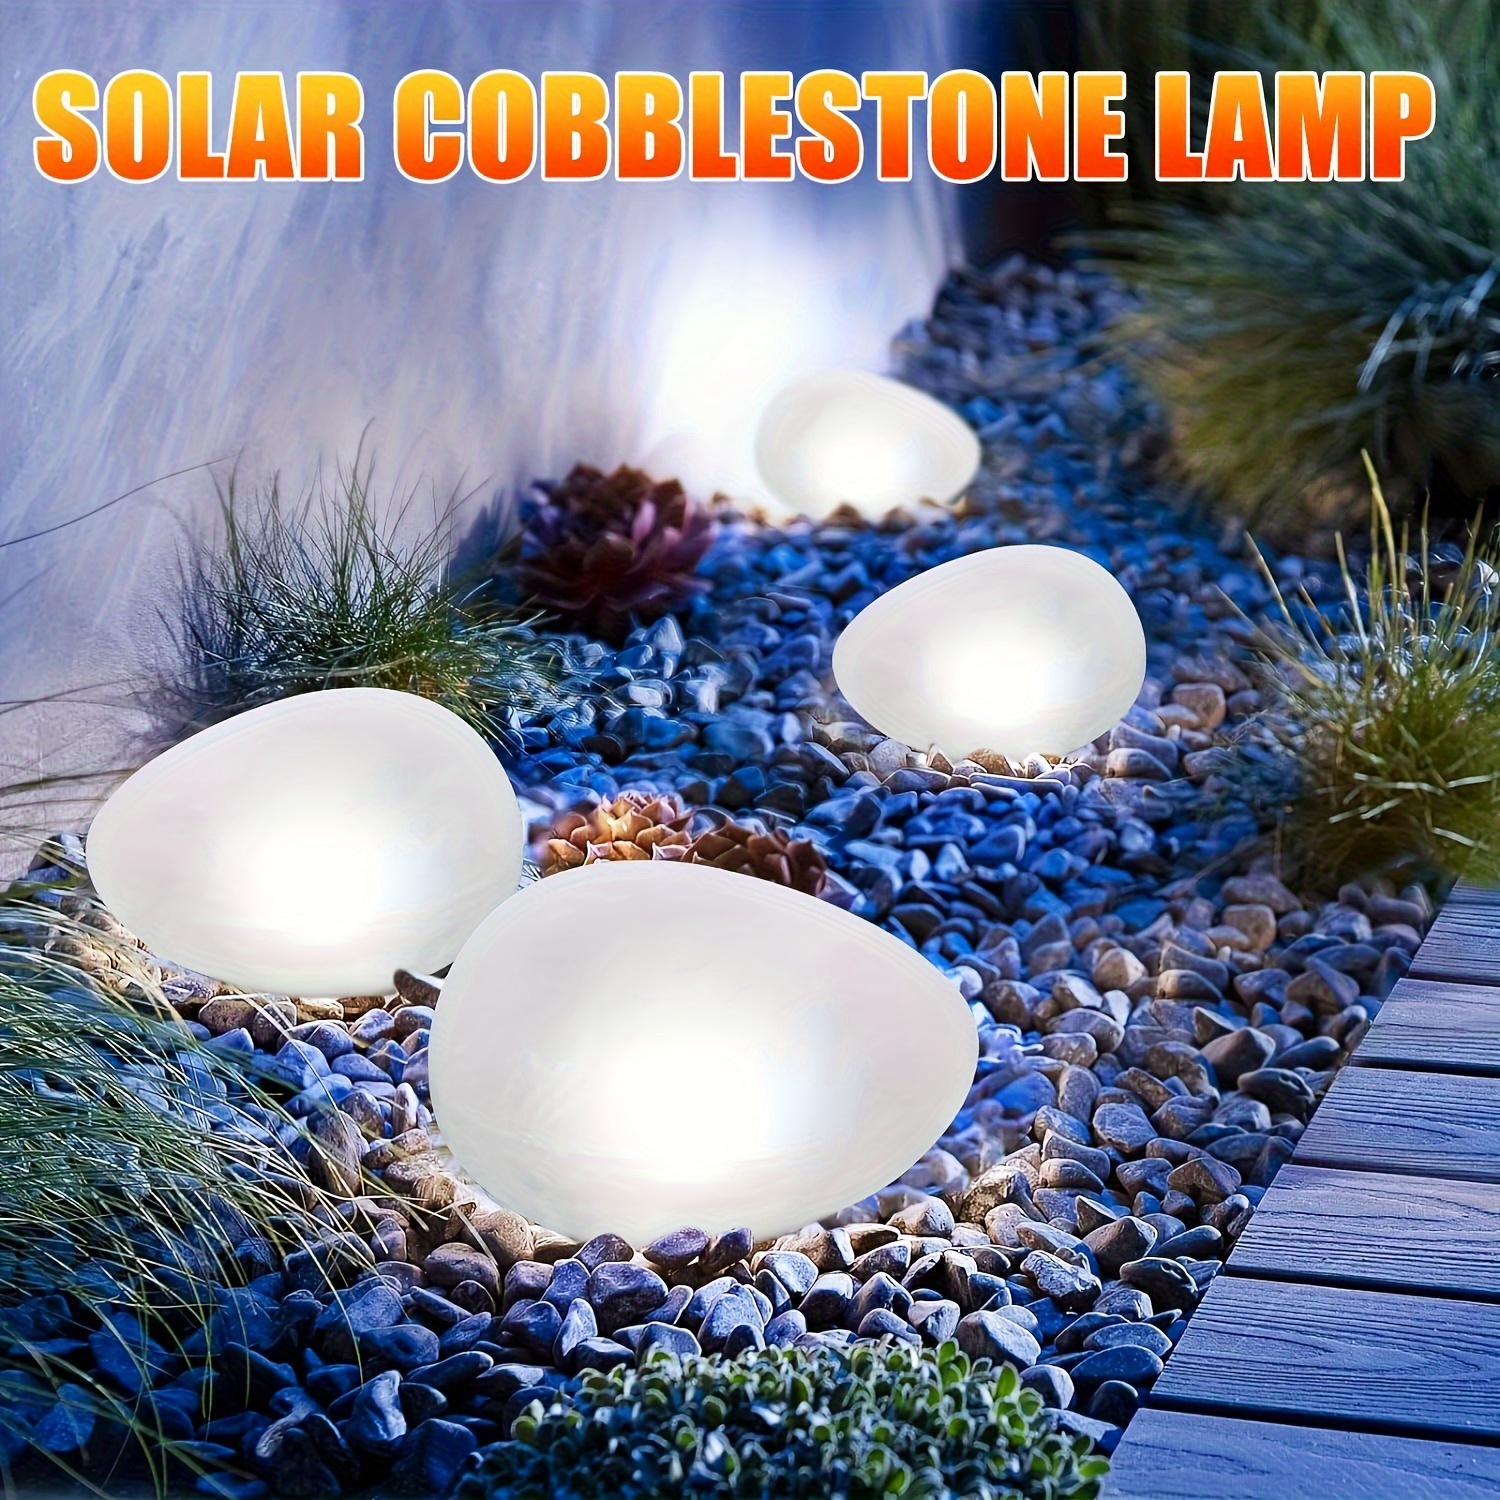 

1pc Solar-powered Led Cobblestone Lamp, Multicolor Pebble Landscape Lamp, Perfect For Indoor/outdoor, Yard, Garden Pathway, Pool, Wedding, Dinner, Festival Decor